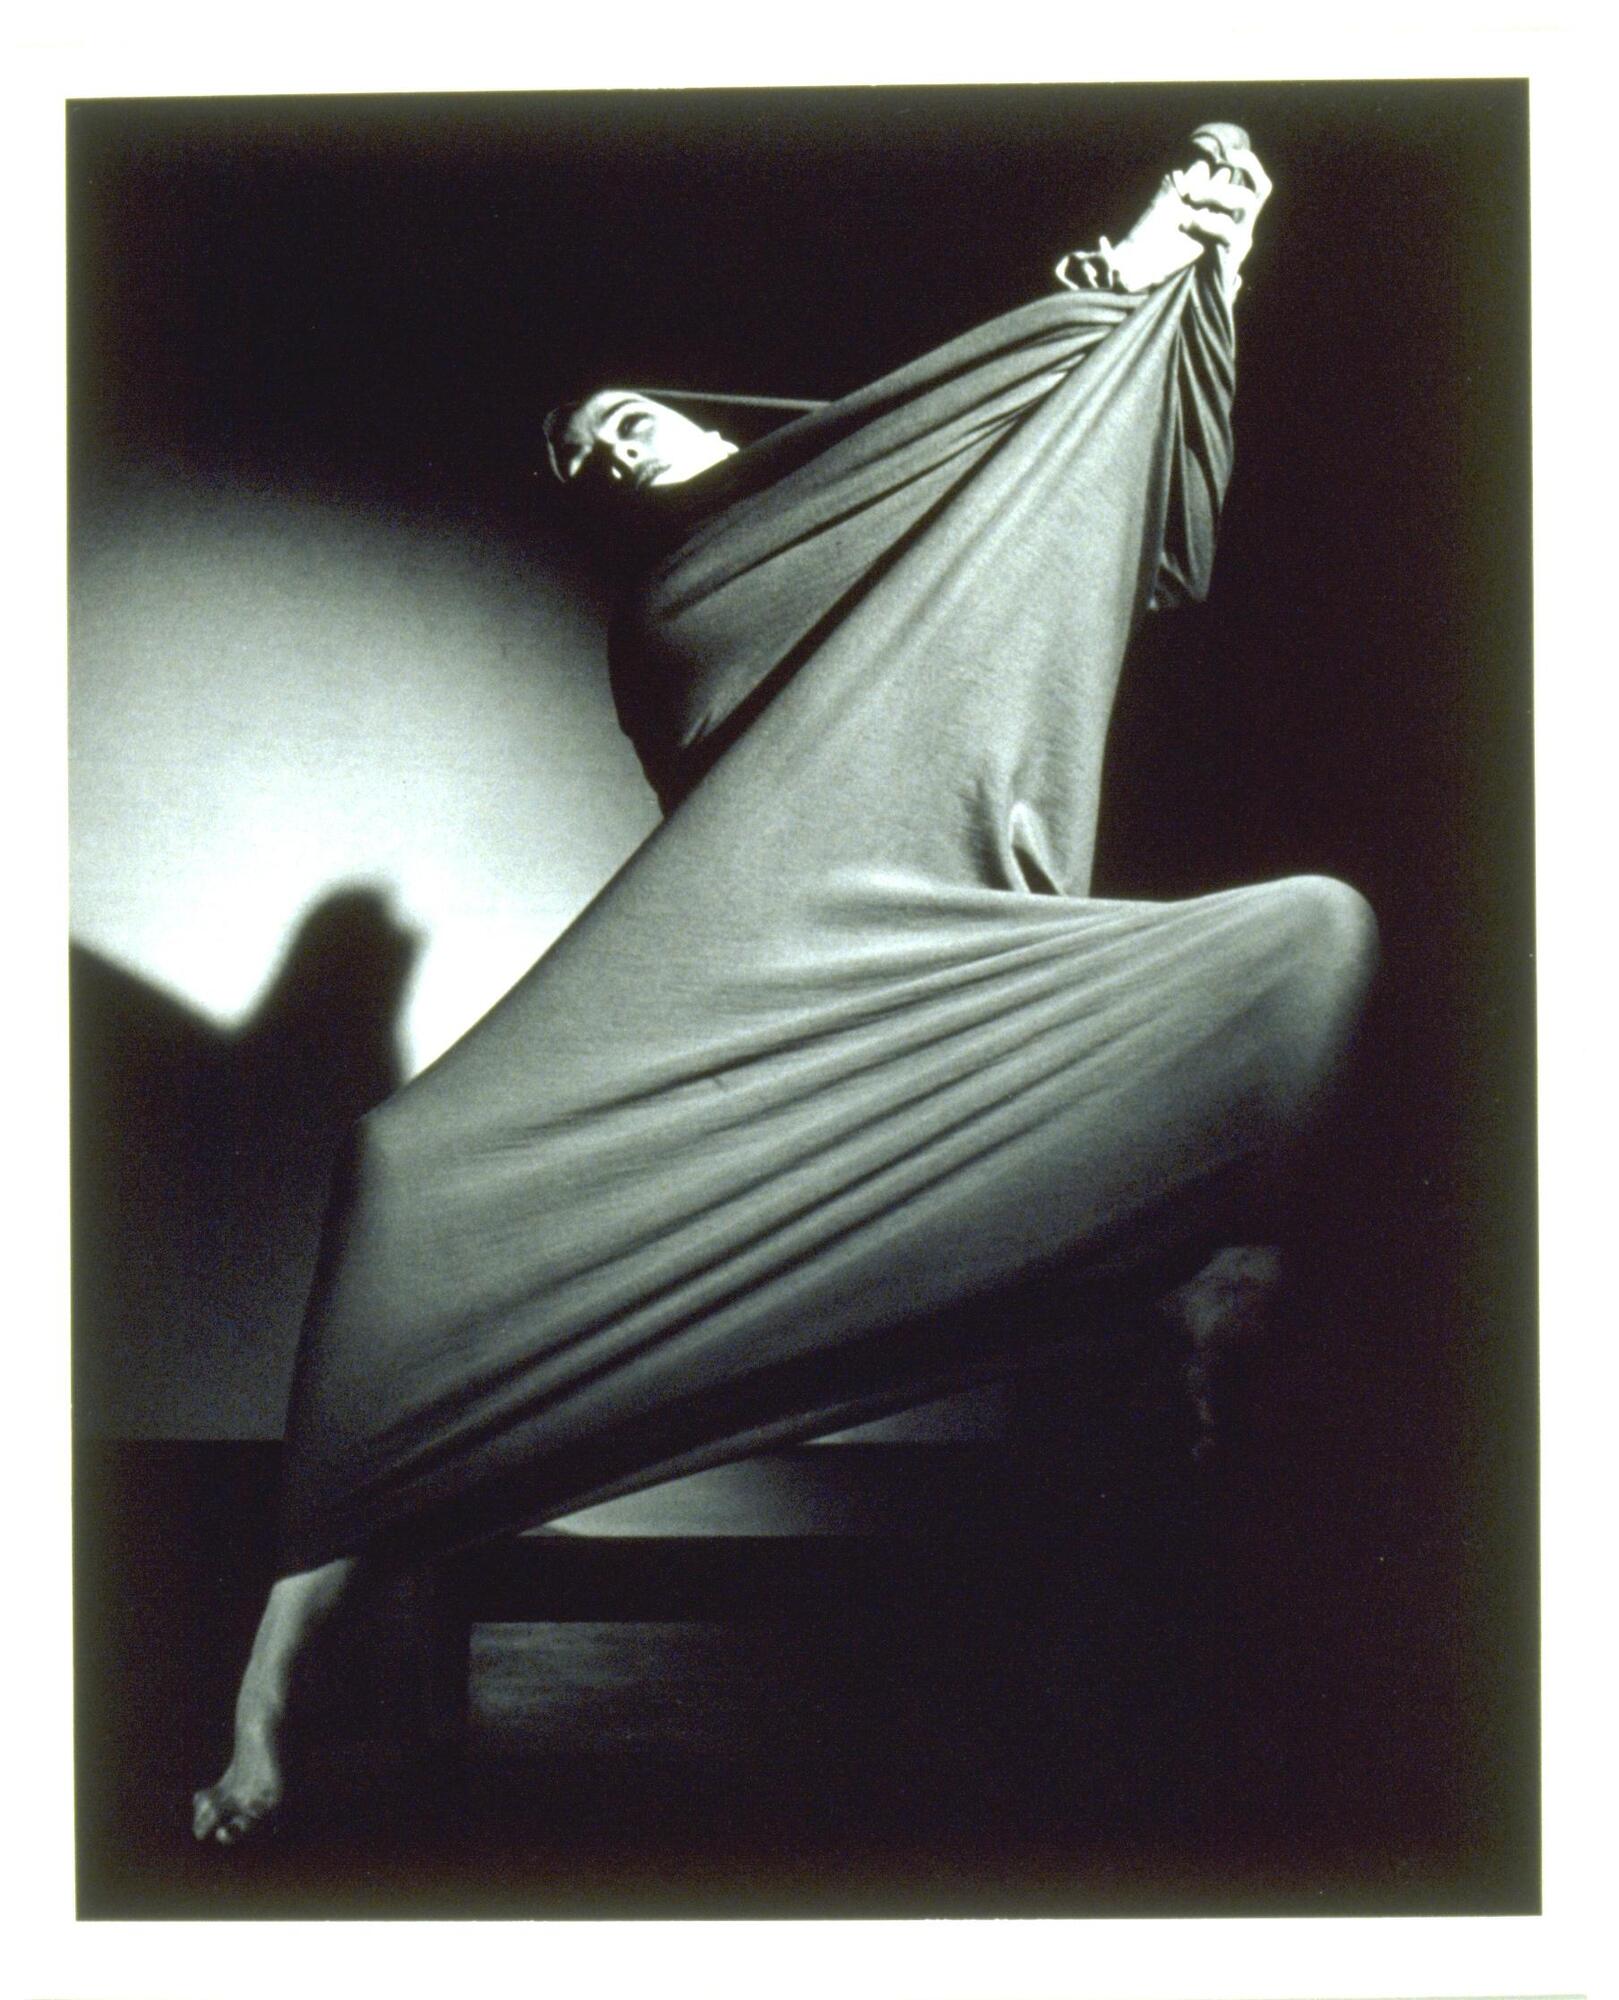 A photograph of a woman dancing. She lifts her arms up toward the right of the frame, her legs creating a diagonal across the bottom of the frame. 